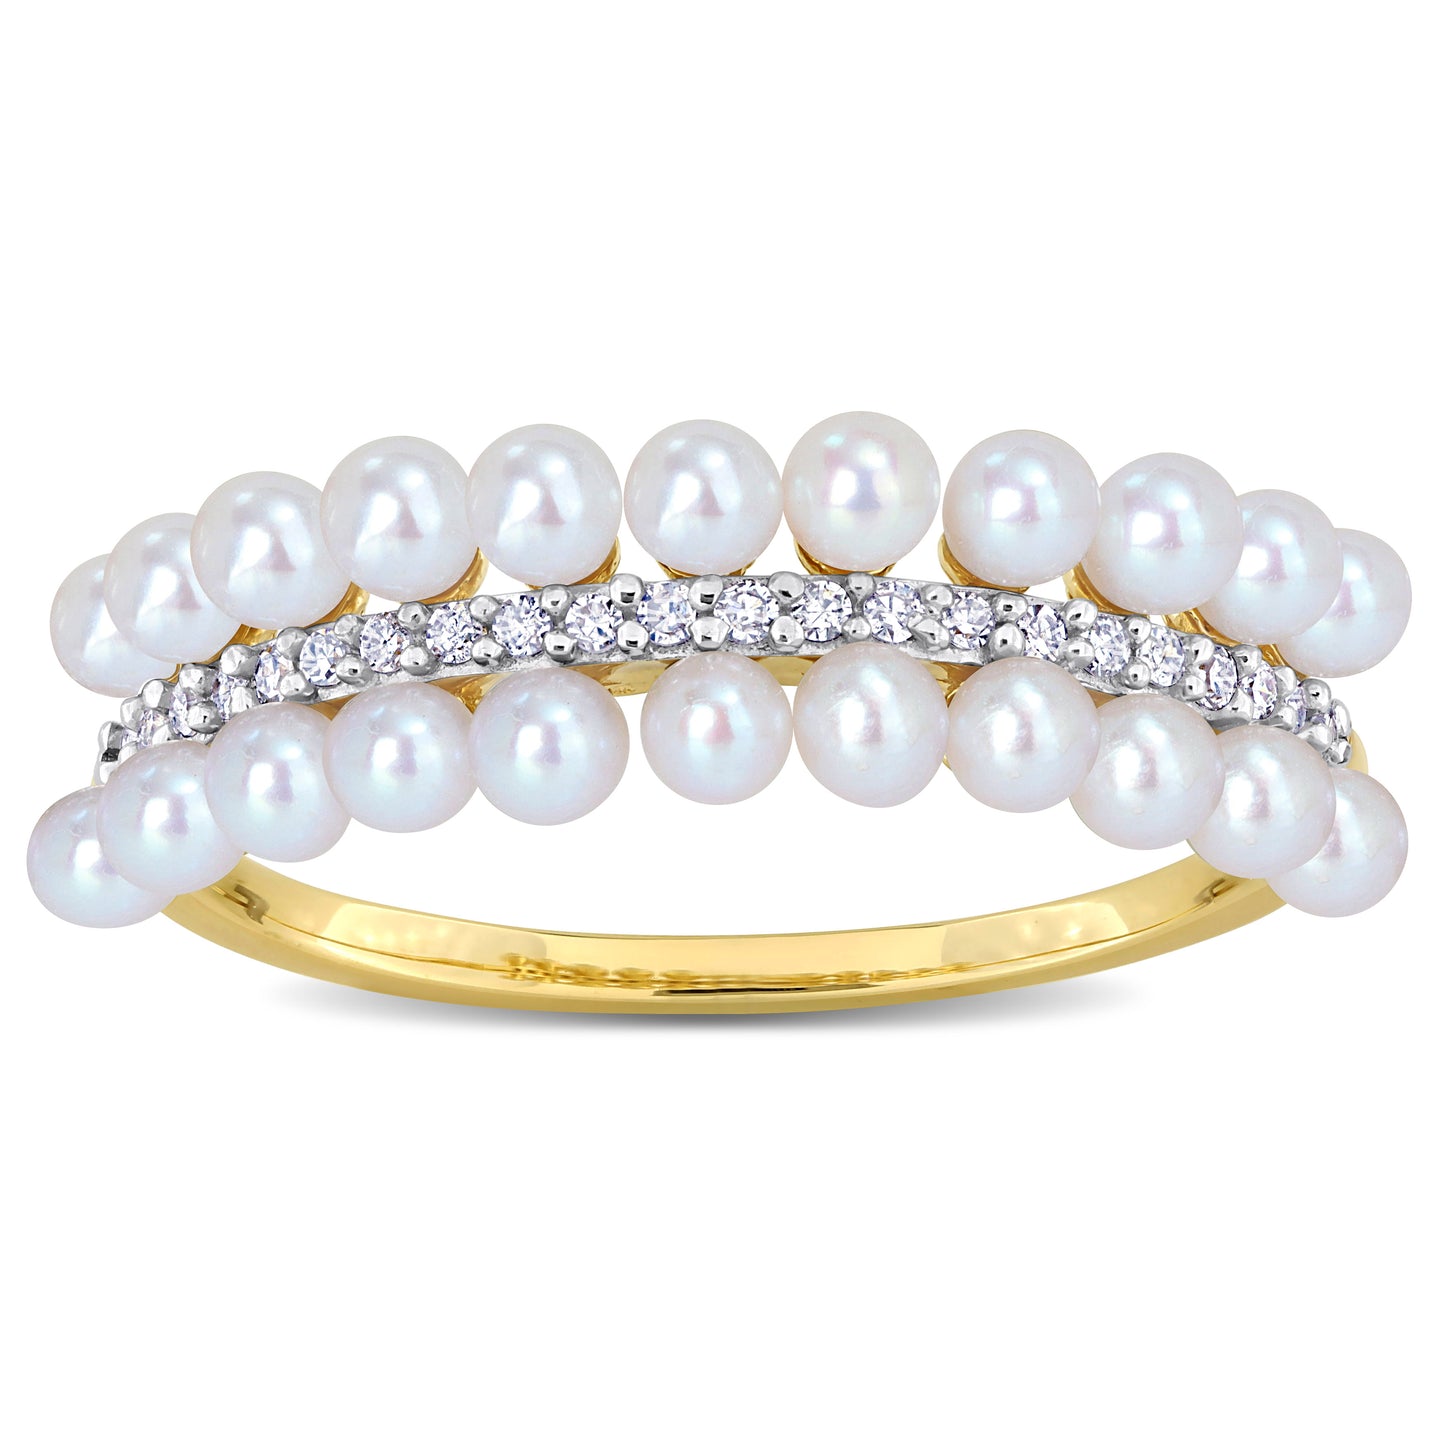 1/10 CT Diamond TW 2-2.5 MM White Freshwater Cultured Pearl Fashion Ring 14k Yellow Gold GH I1;I2